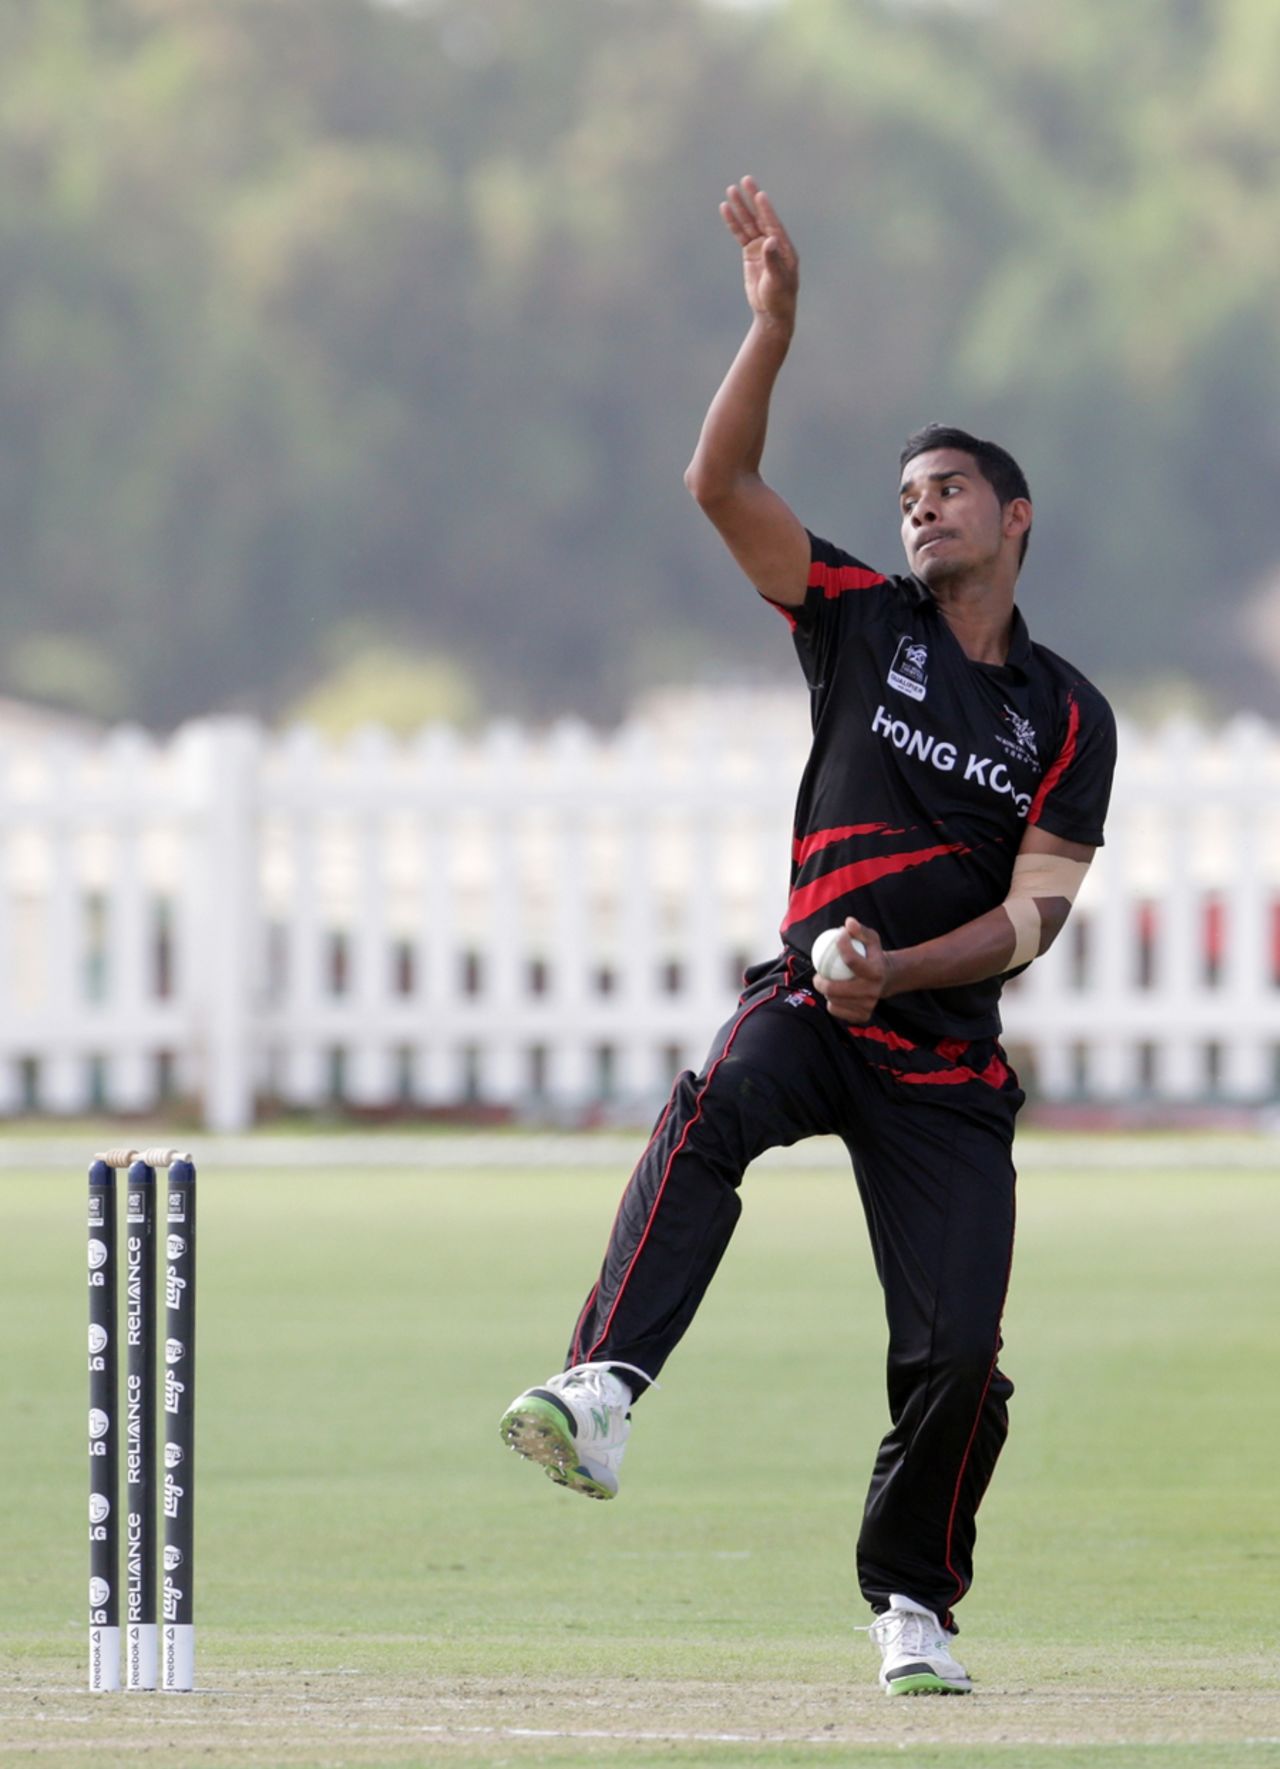 Nadeem Ahmed of Hong Kong bowling in the match between Uganda and Hong Kong at the ICC World Twenty20 Qualifiers at the Zayed Cricket Stadium on November 16, 2013 in Abu Dhabi, United Arab Emirates. (Photo by Graham Crouch-IDI/IDI via Getty Images)